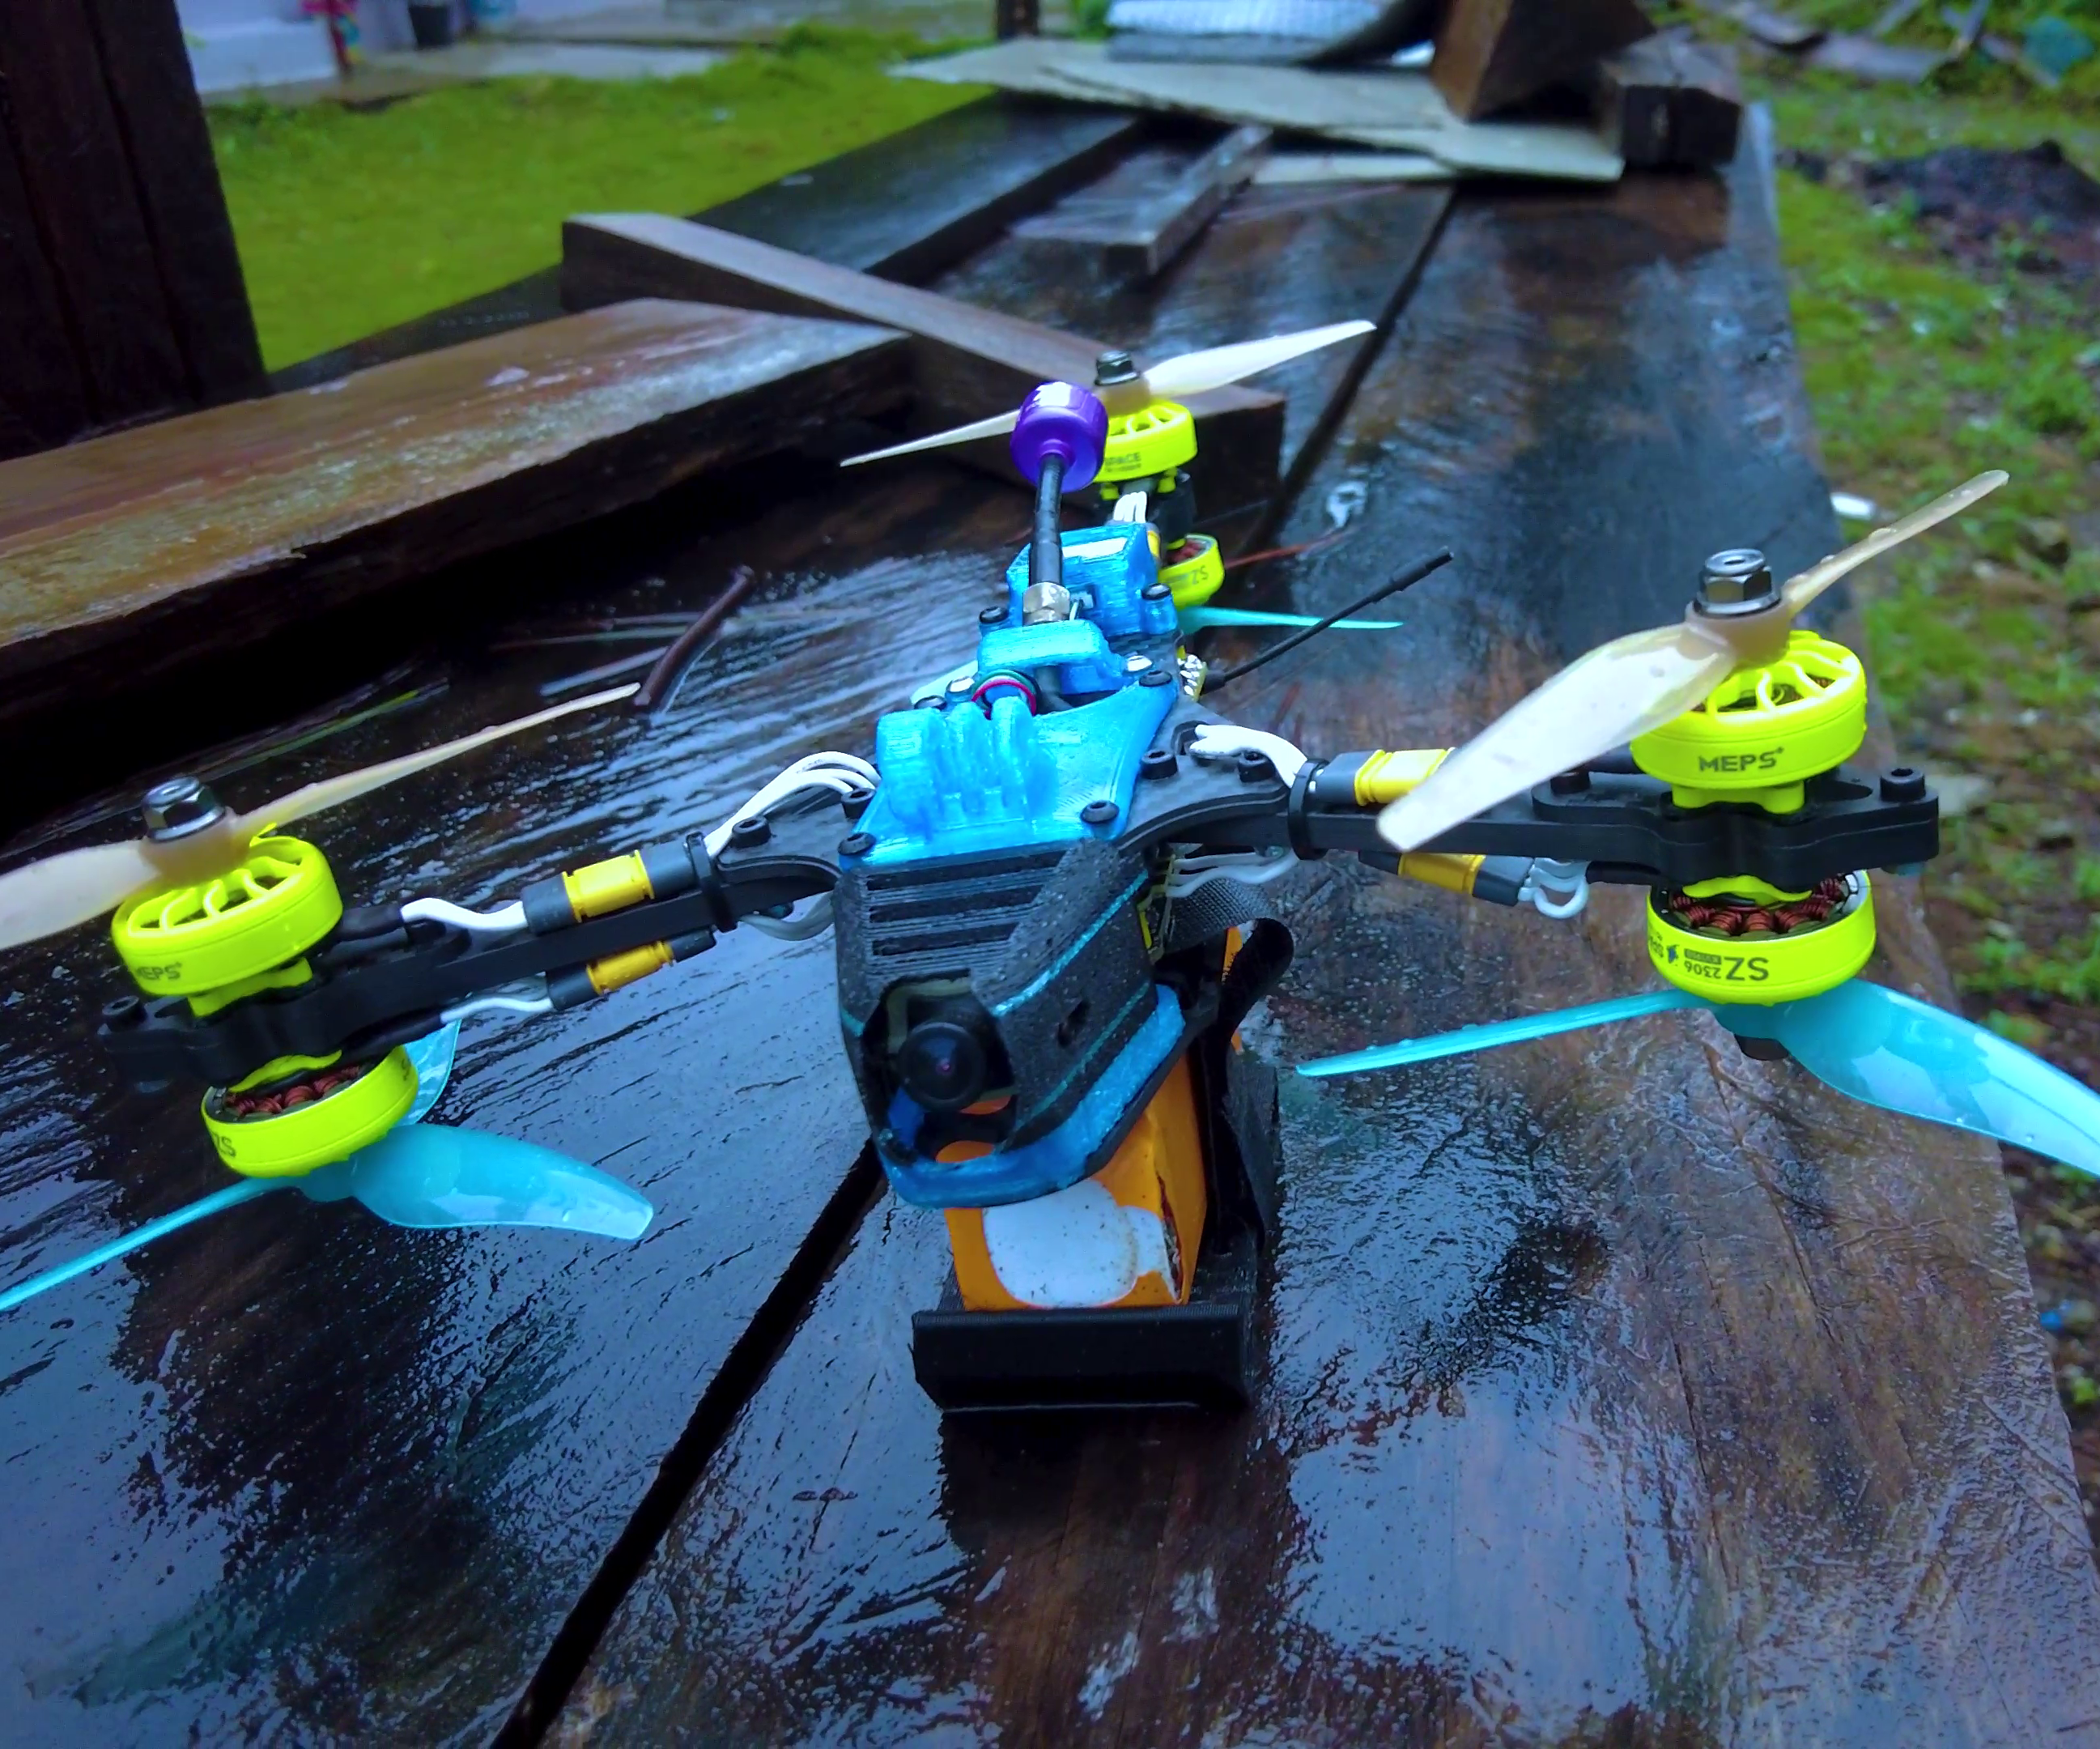 Build a Drone With Six Motors